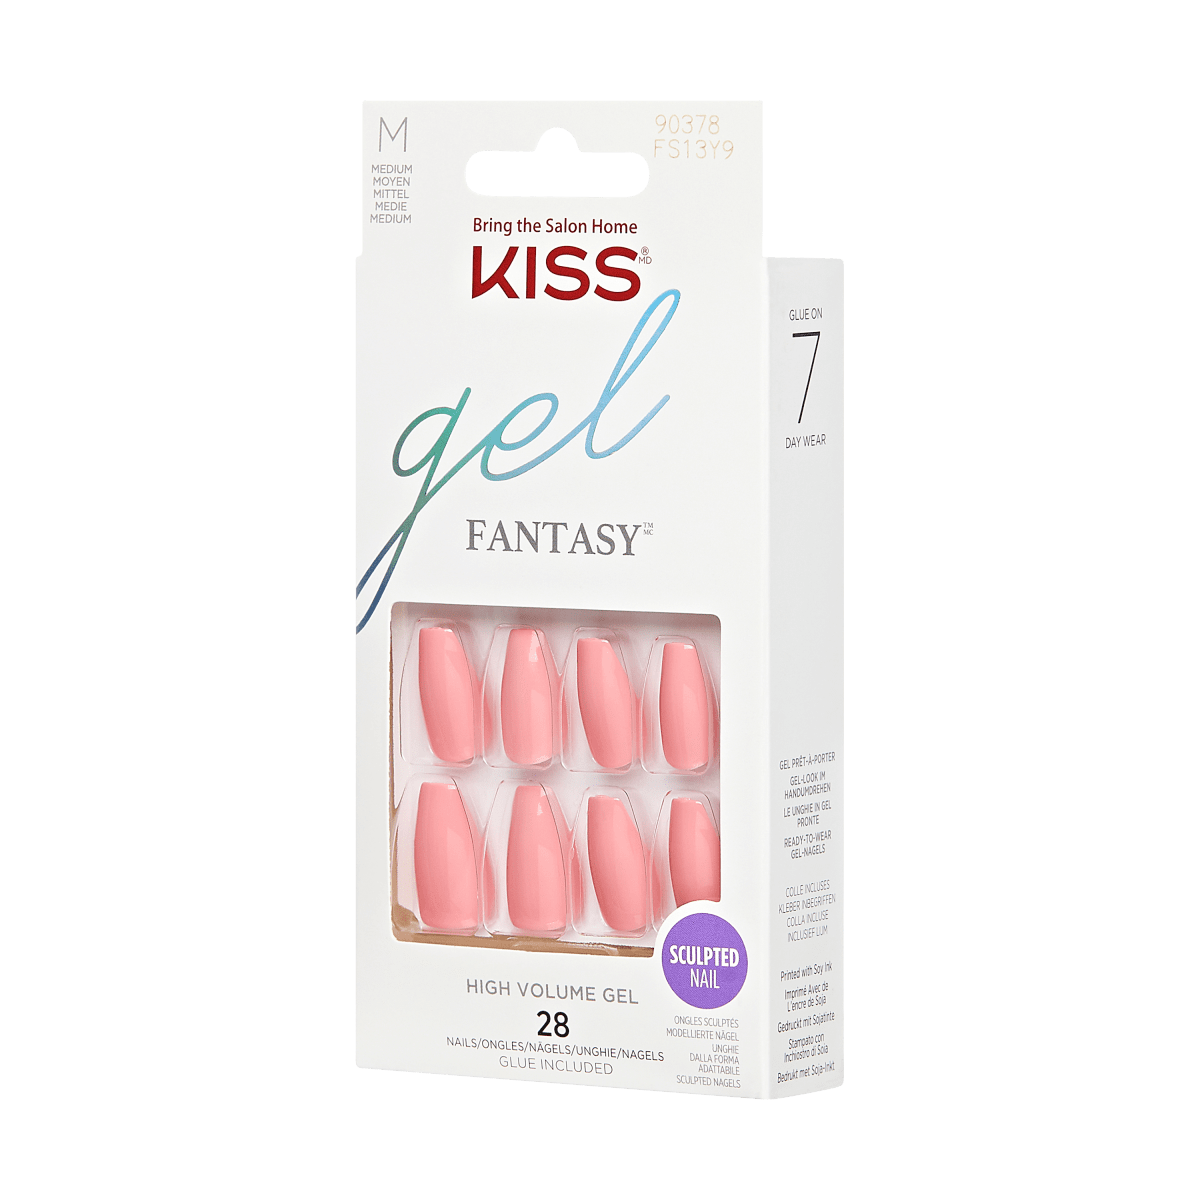 KISS Gel Fantasy Sculpted Press-On Nails - Like Candy